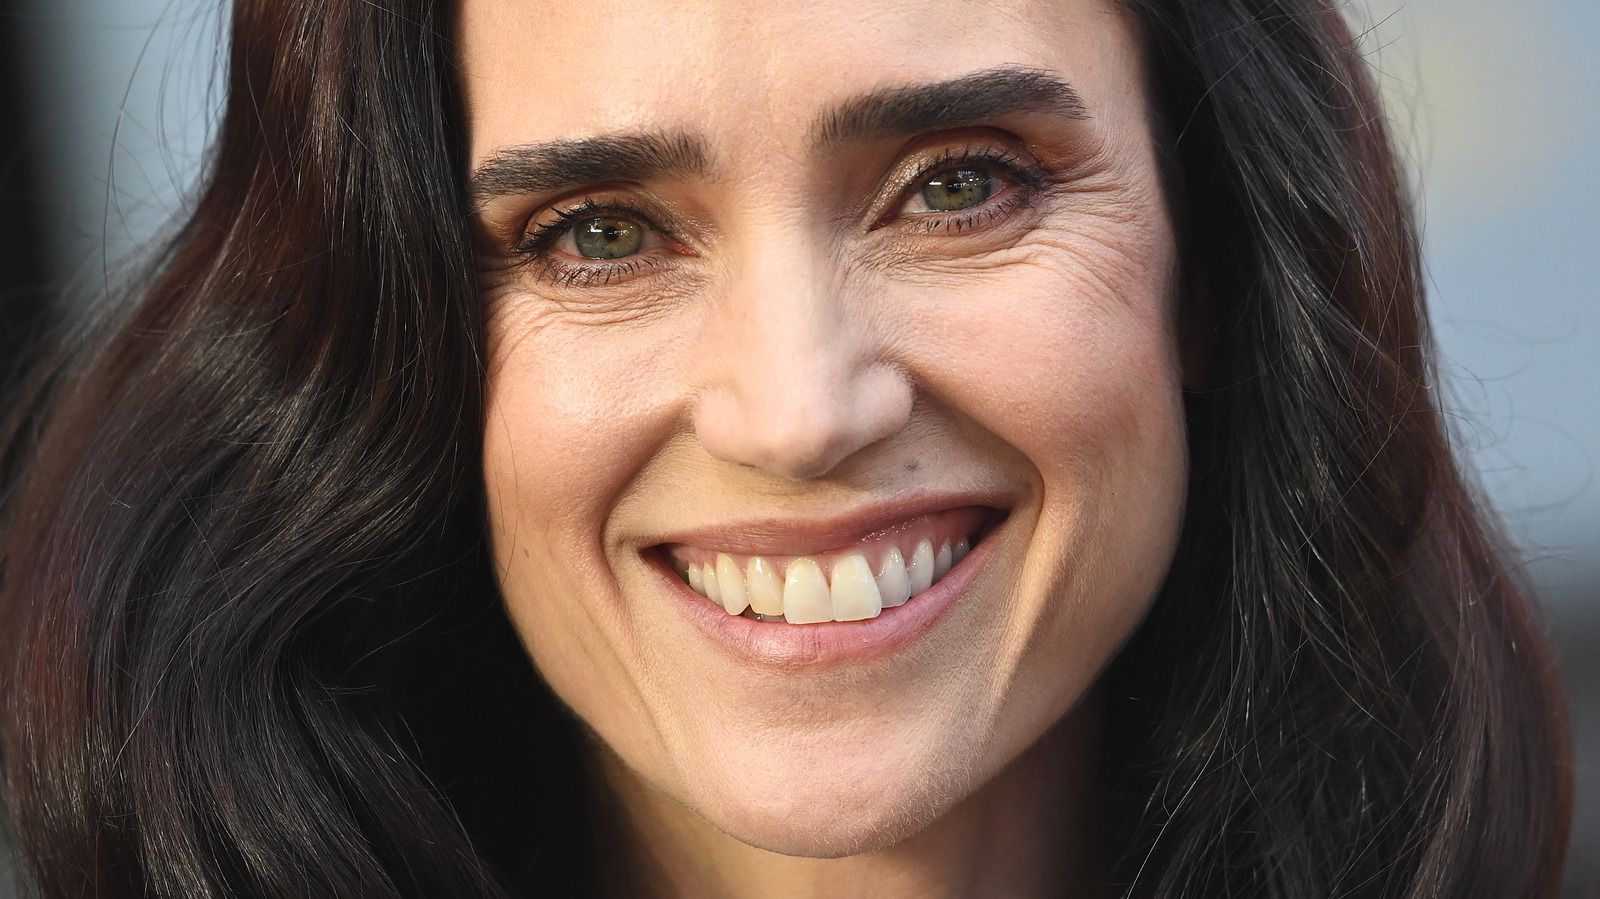 Jennifer Connelly's Short Hair Makes Us Do A Double Take (PHOTOS, POLL)